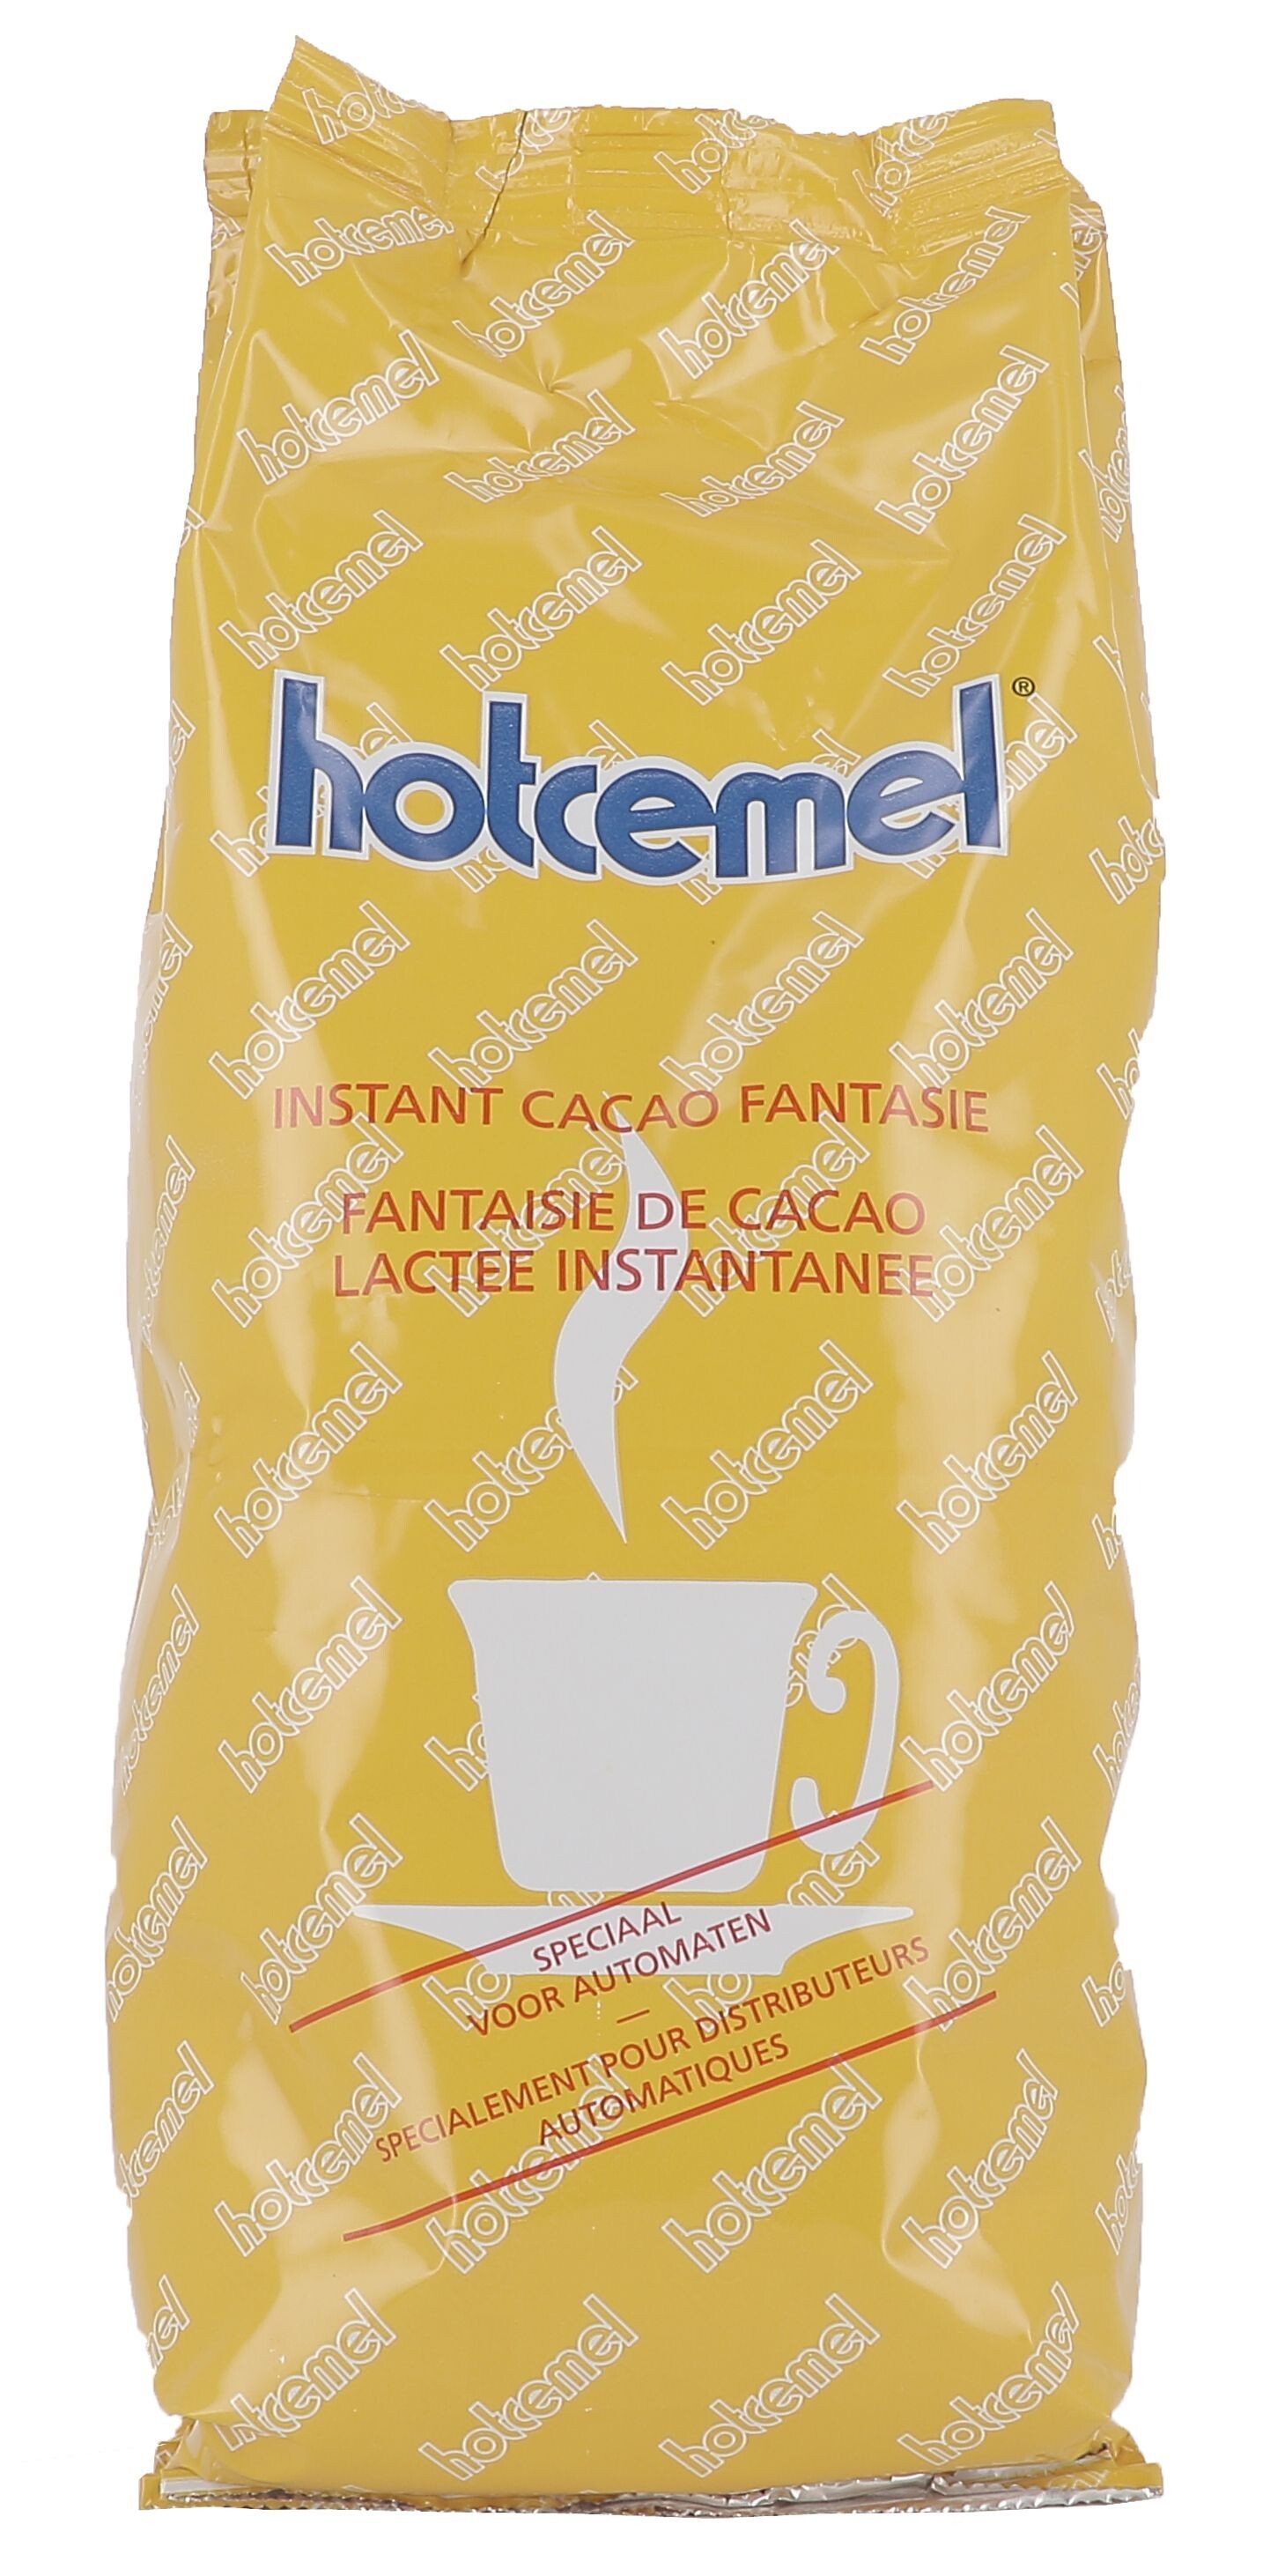 Hotcemel Instant Cacao 10x1kg